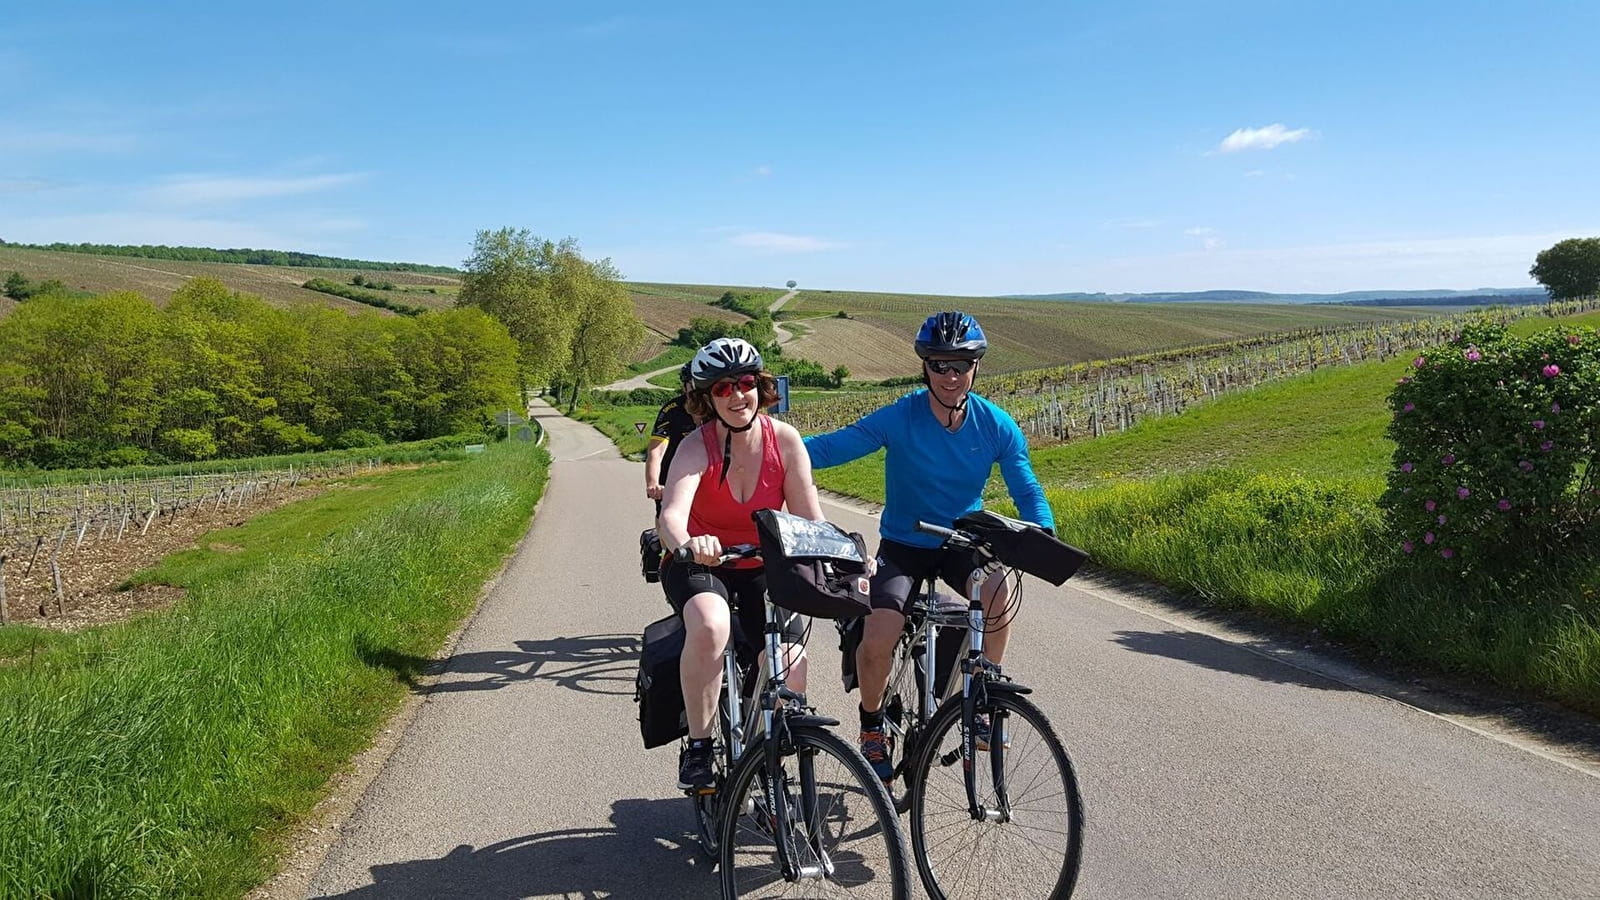 Cycling tour - Lavoirs and churches in the Chablis region